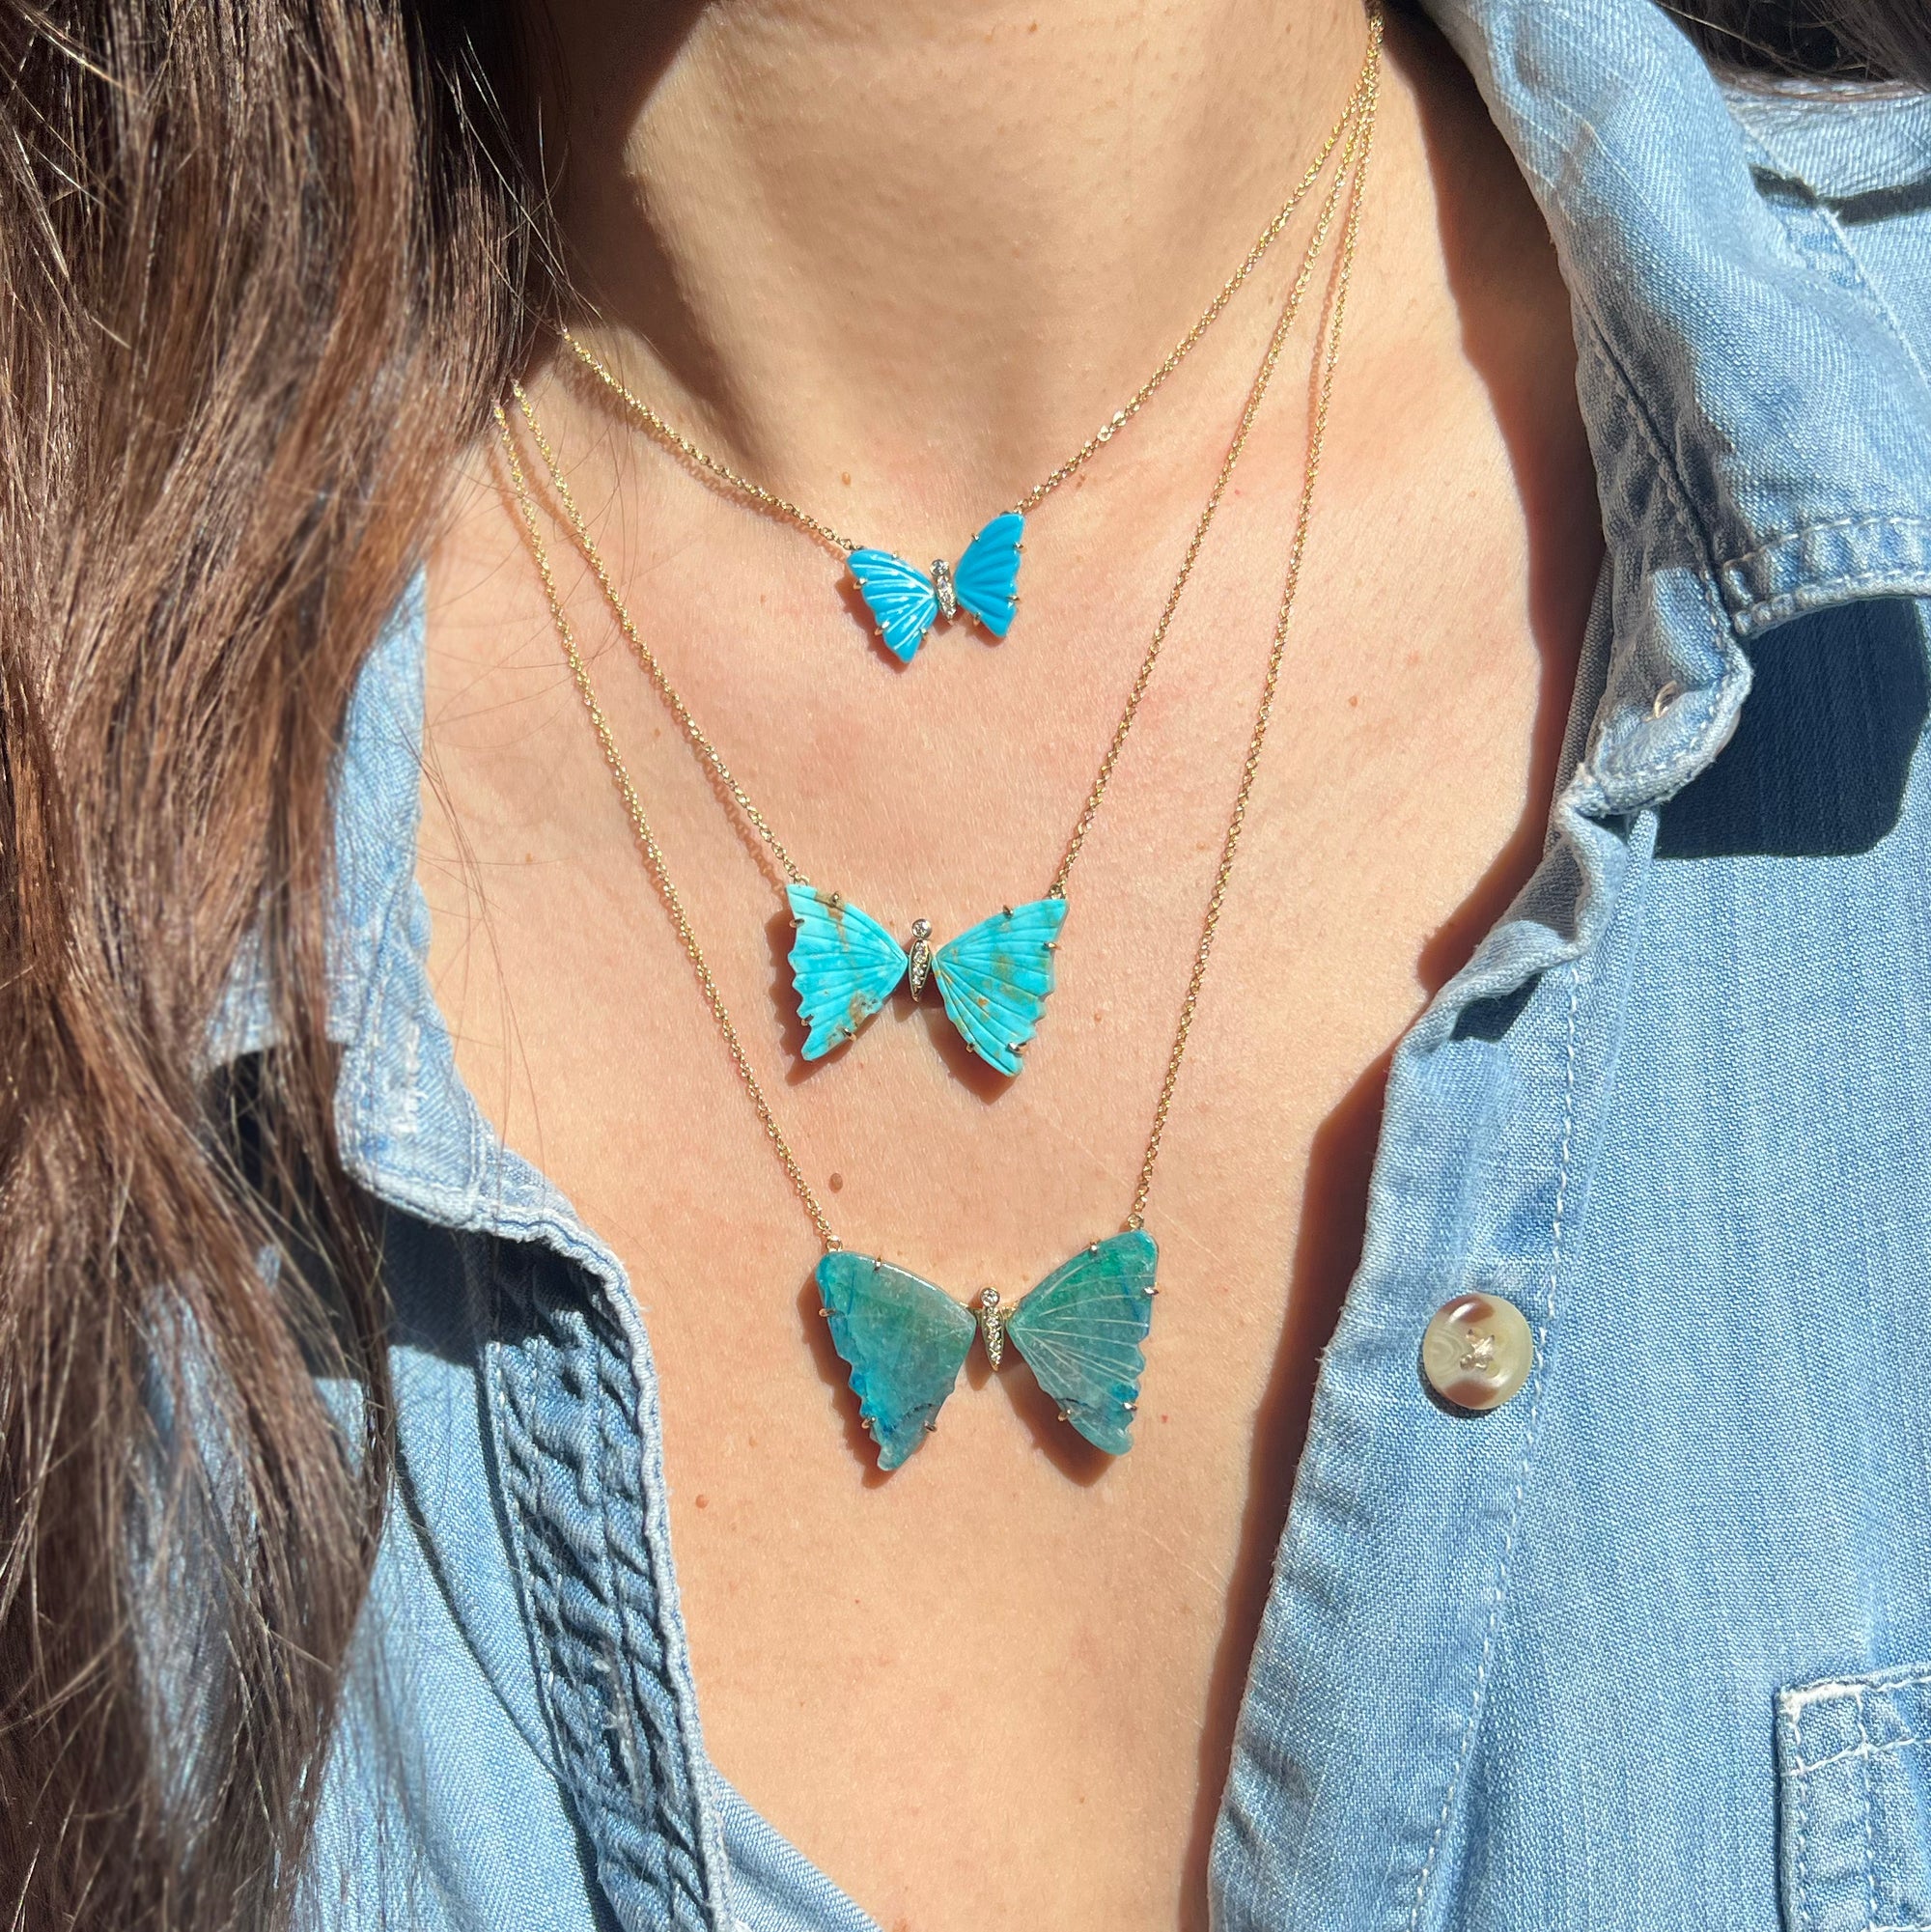 large chrysocolla butterfly necklace with diamonds and prongs